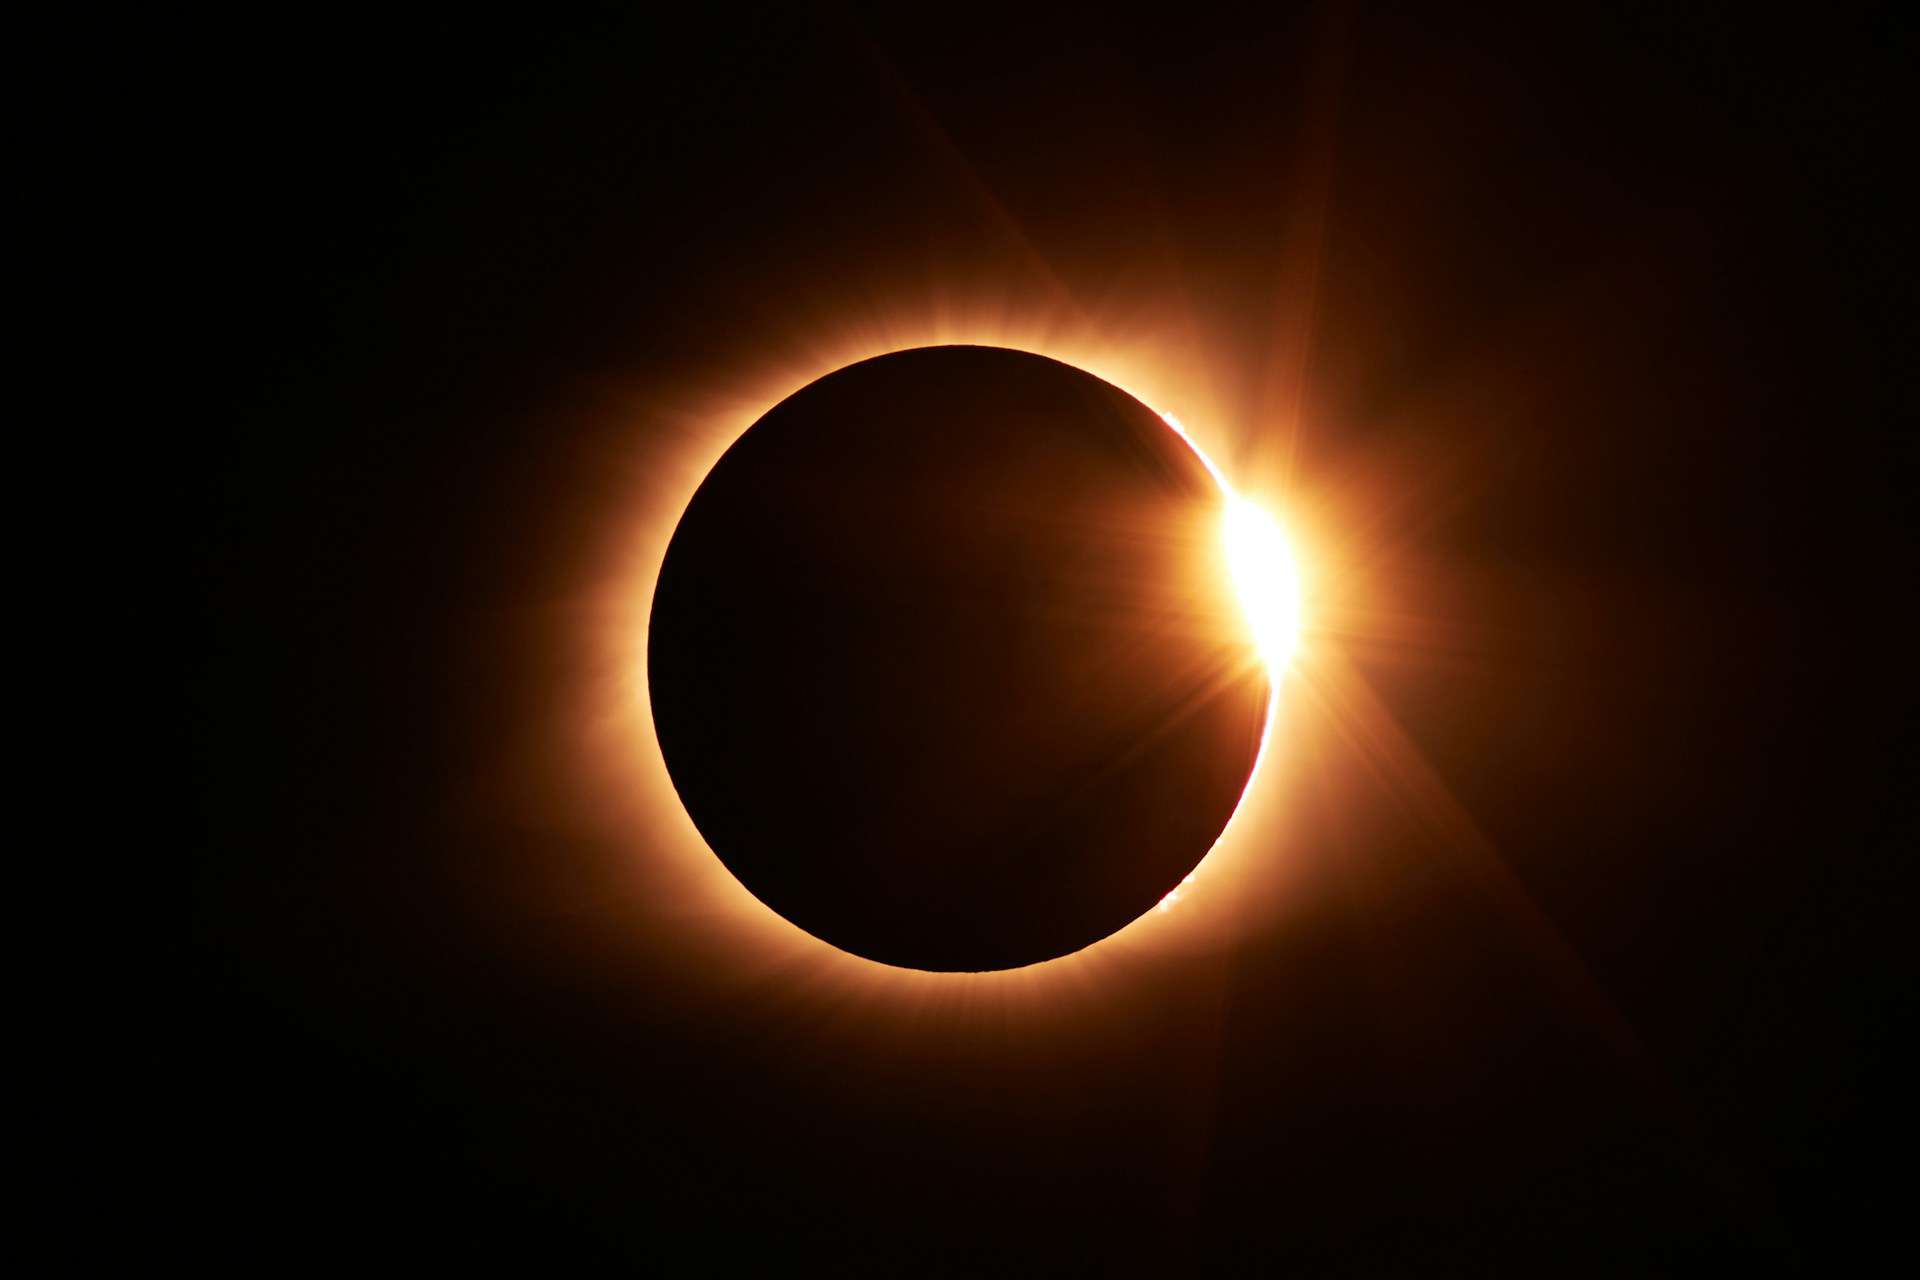 solar eclipse tips and events in Avon lake Ohio